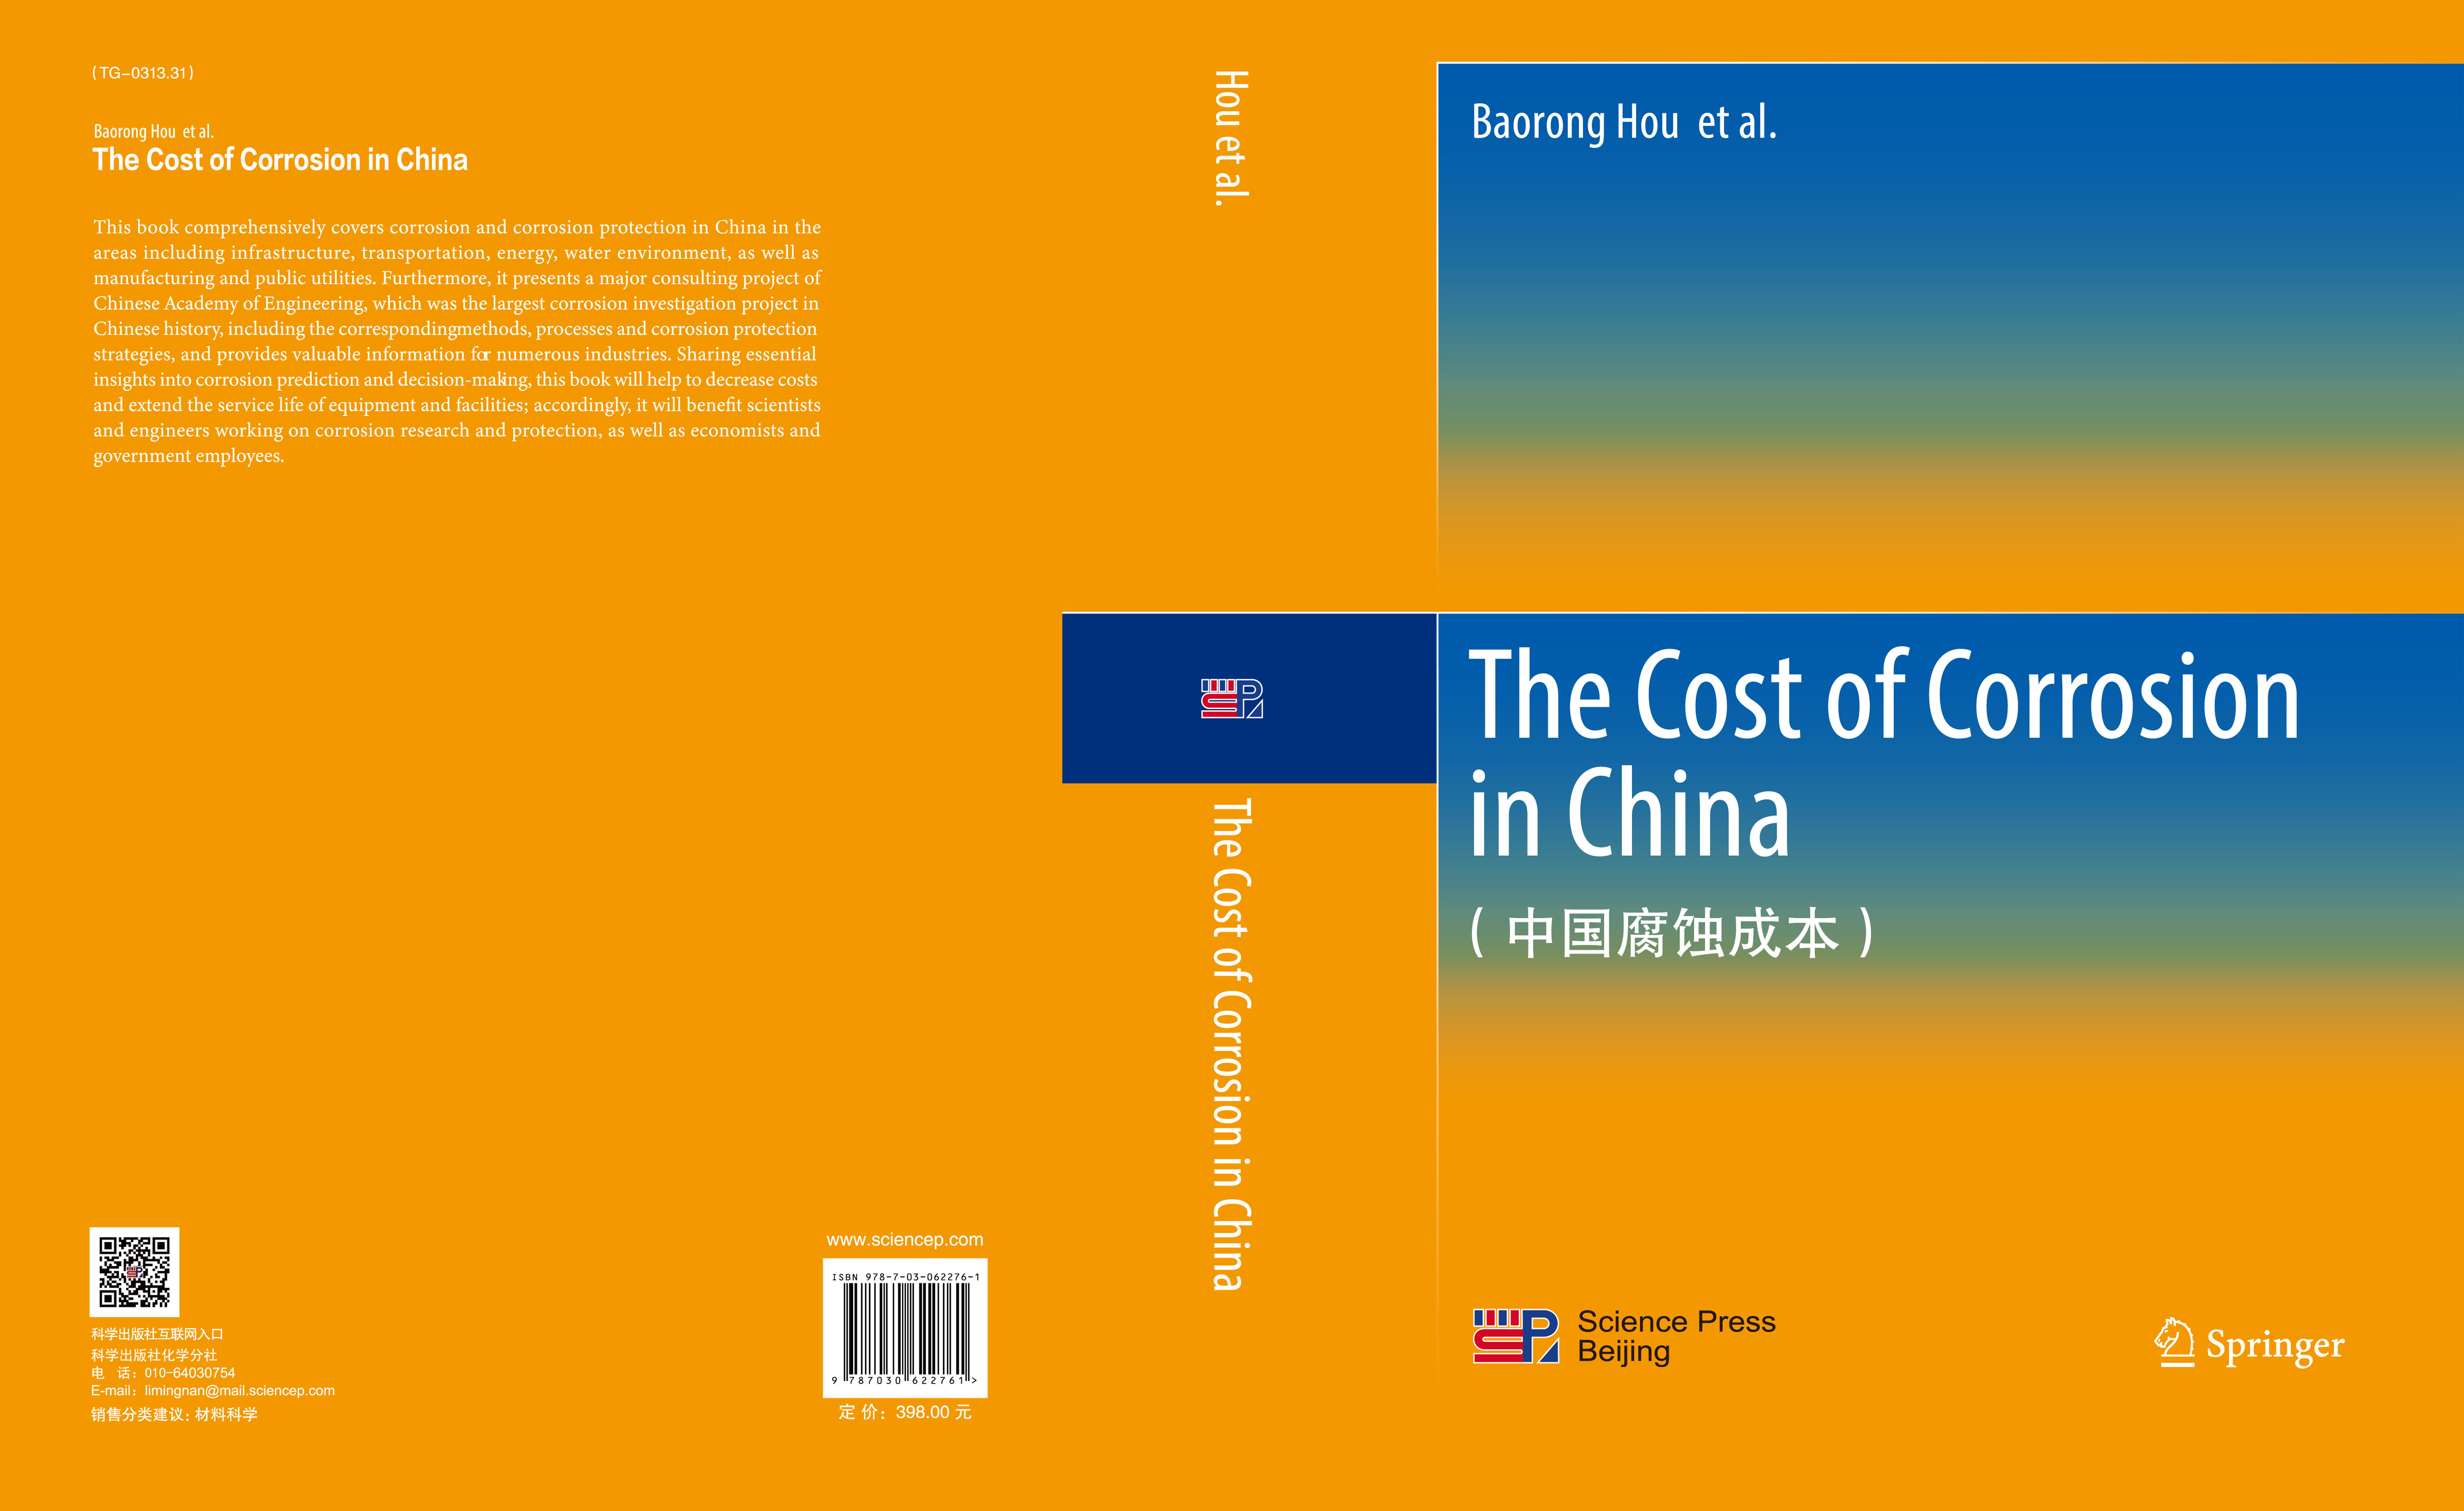 The Cost of Corrosion in China(《中国腐蚀成本》英文版)